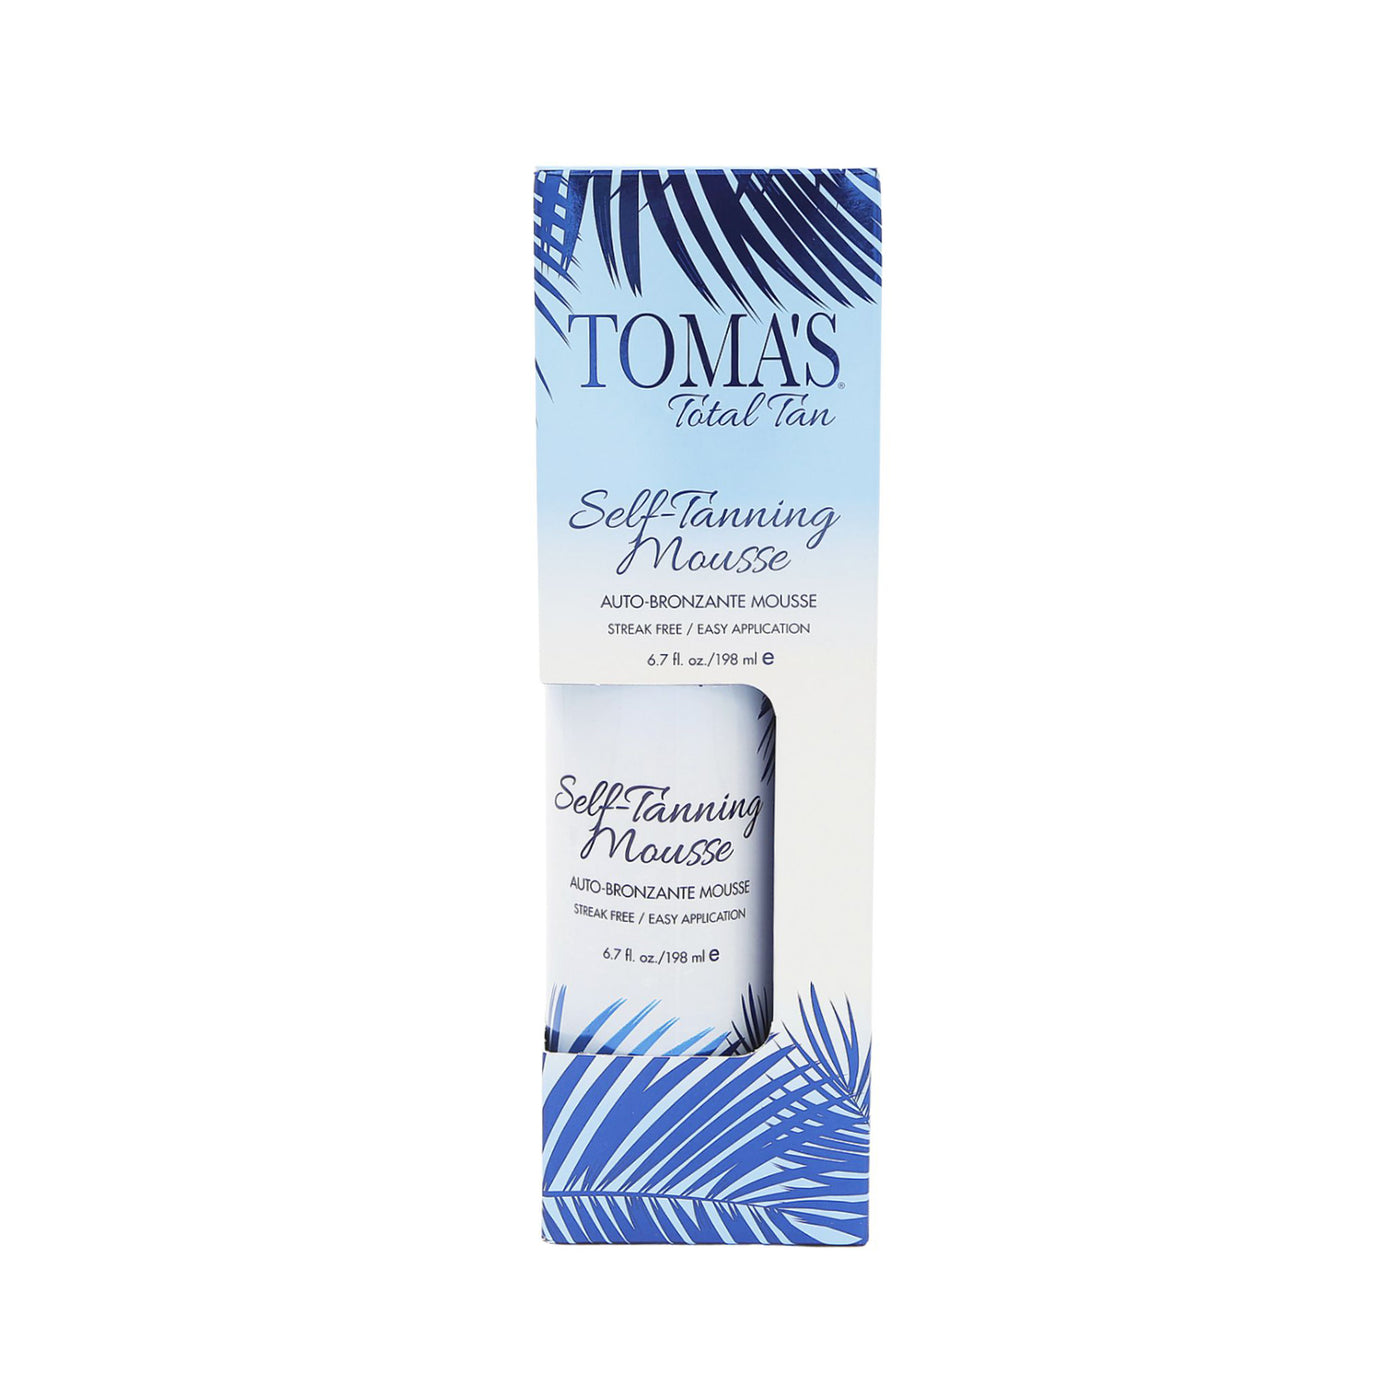 Toma's Total Tan Self-Tanning Mousse